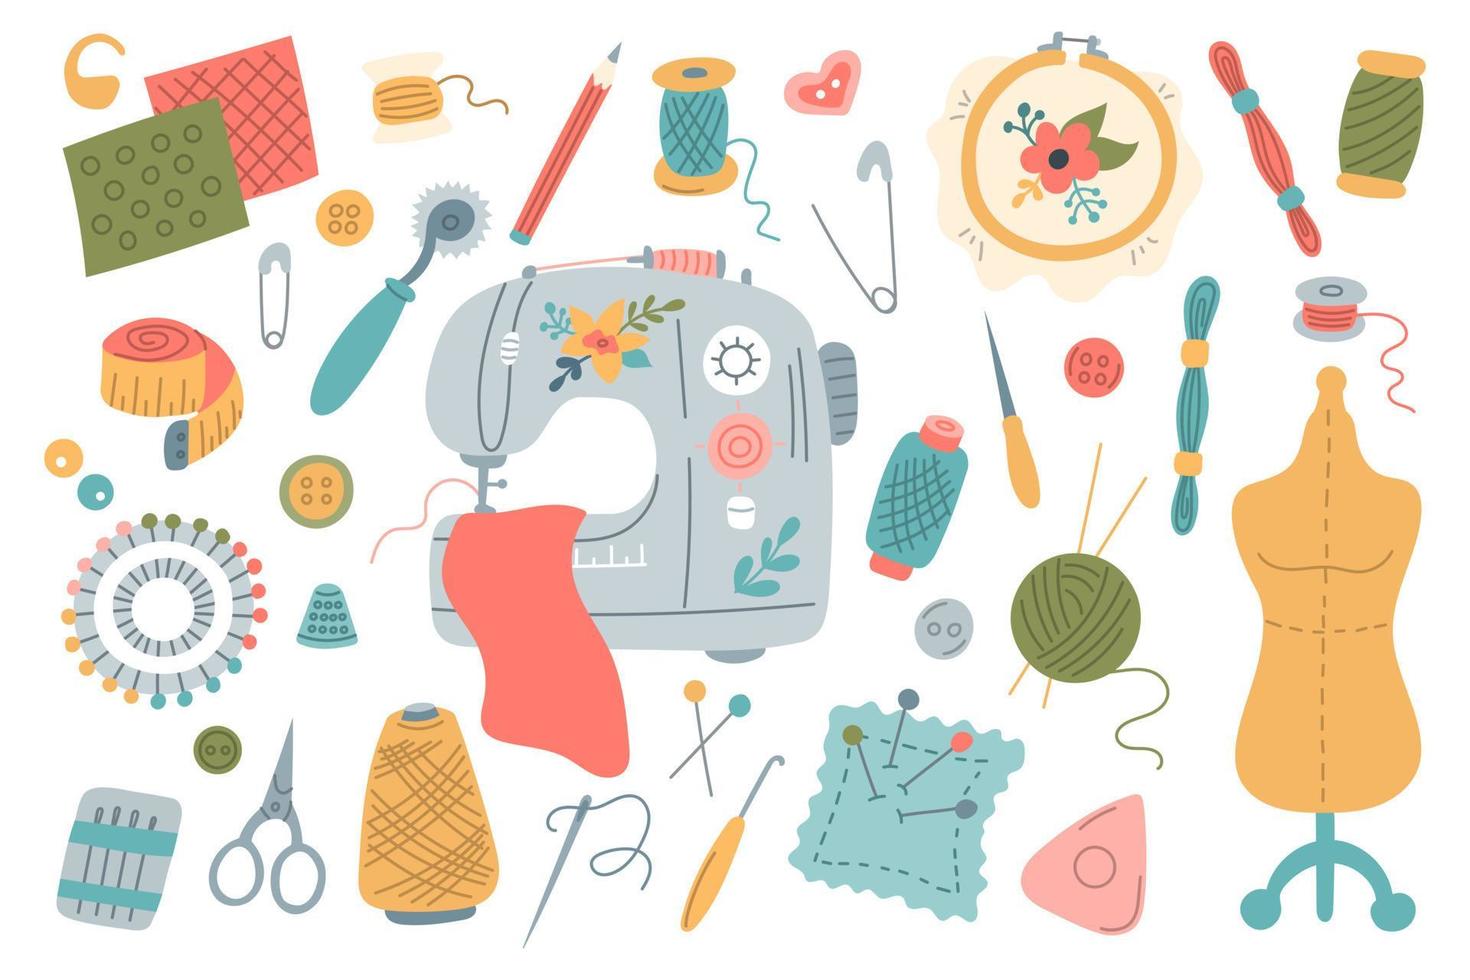 Set of sewing elements for needlework and embroidery. Scissors, needles, thread, sewing machine and buttons. Vector illustration in flat style